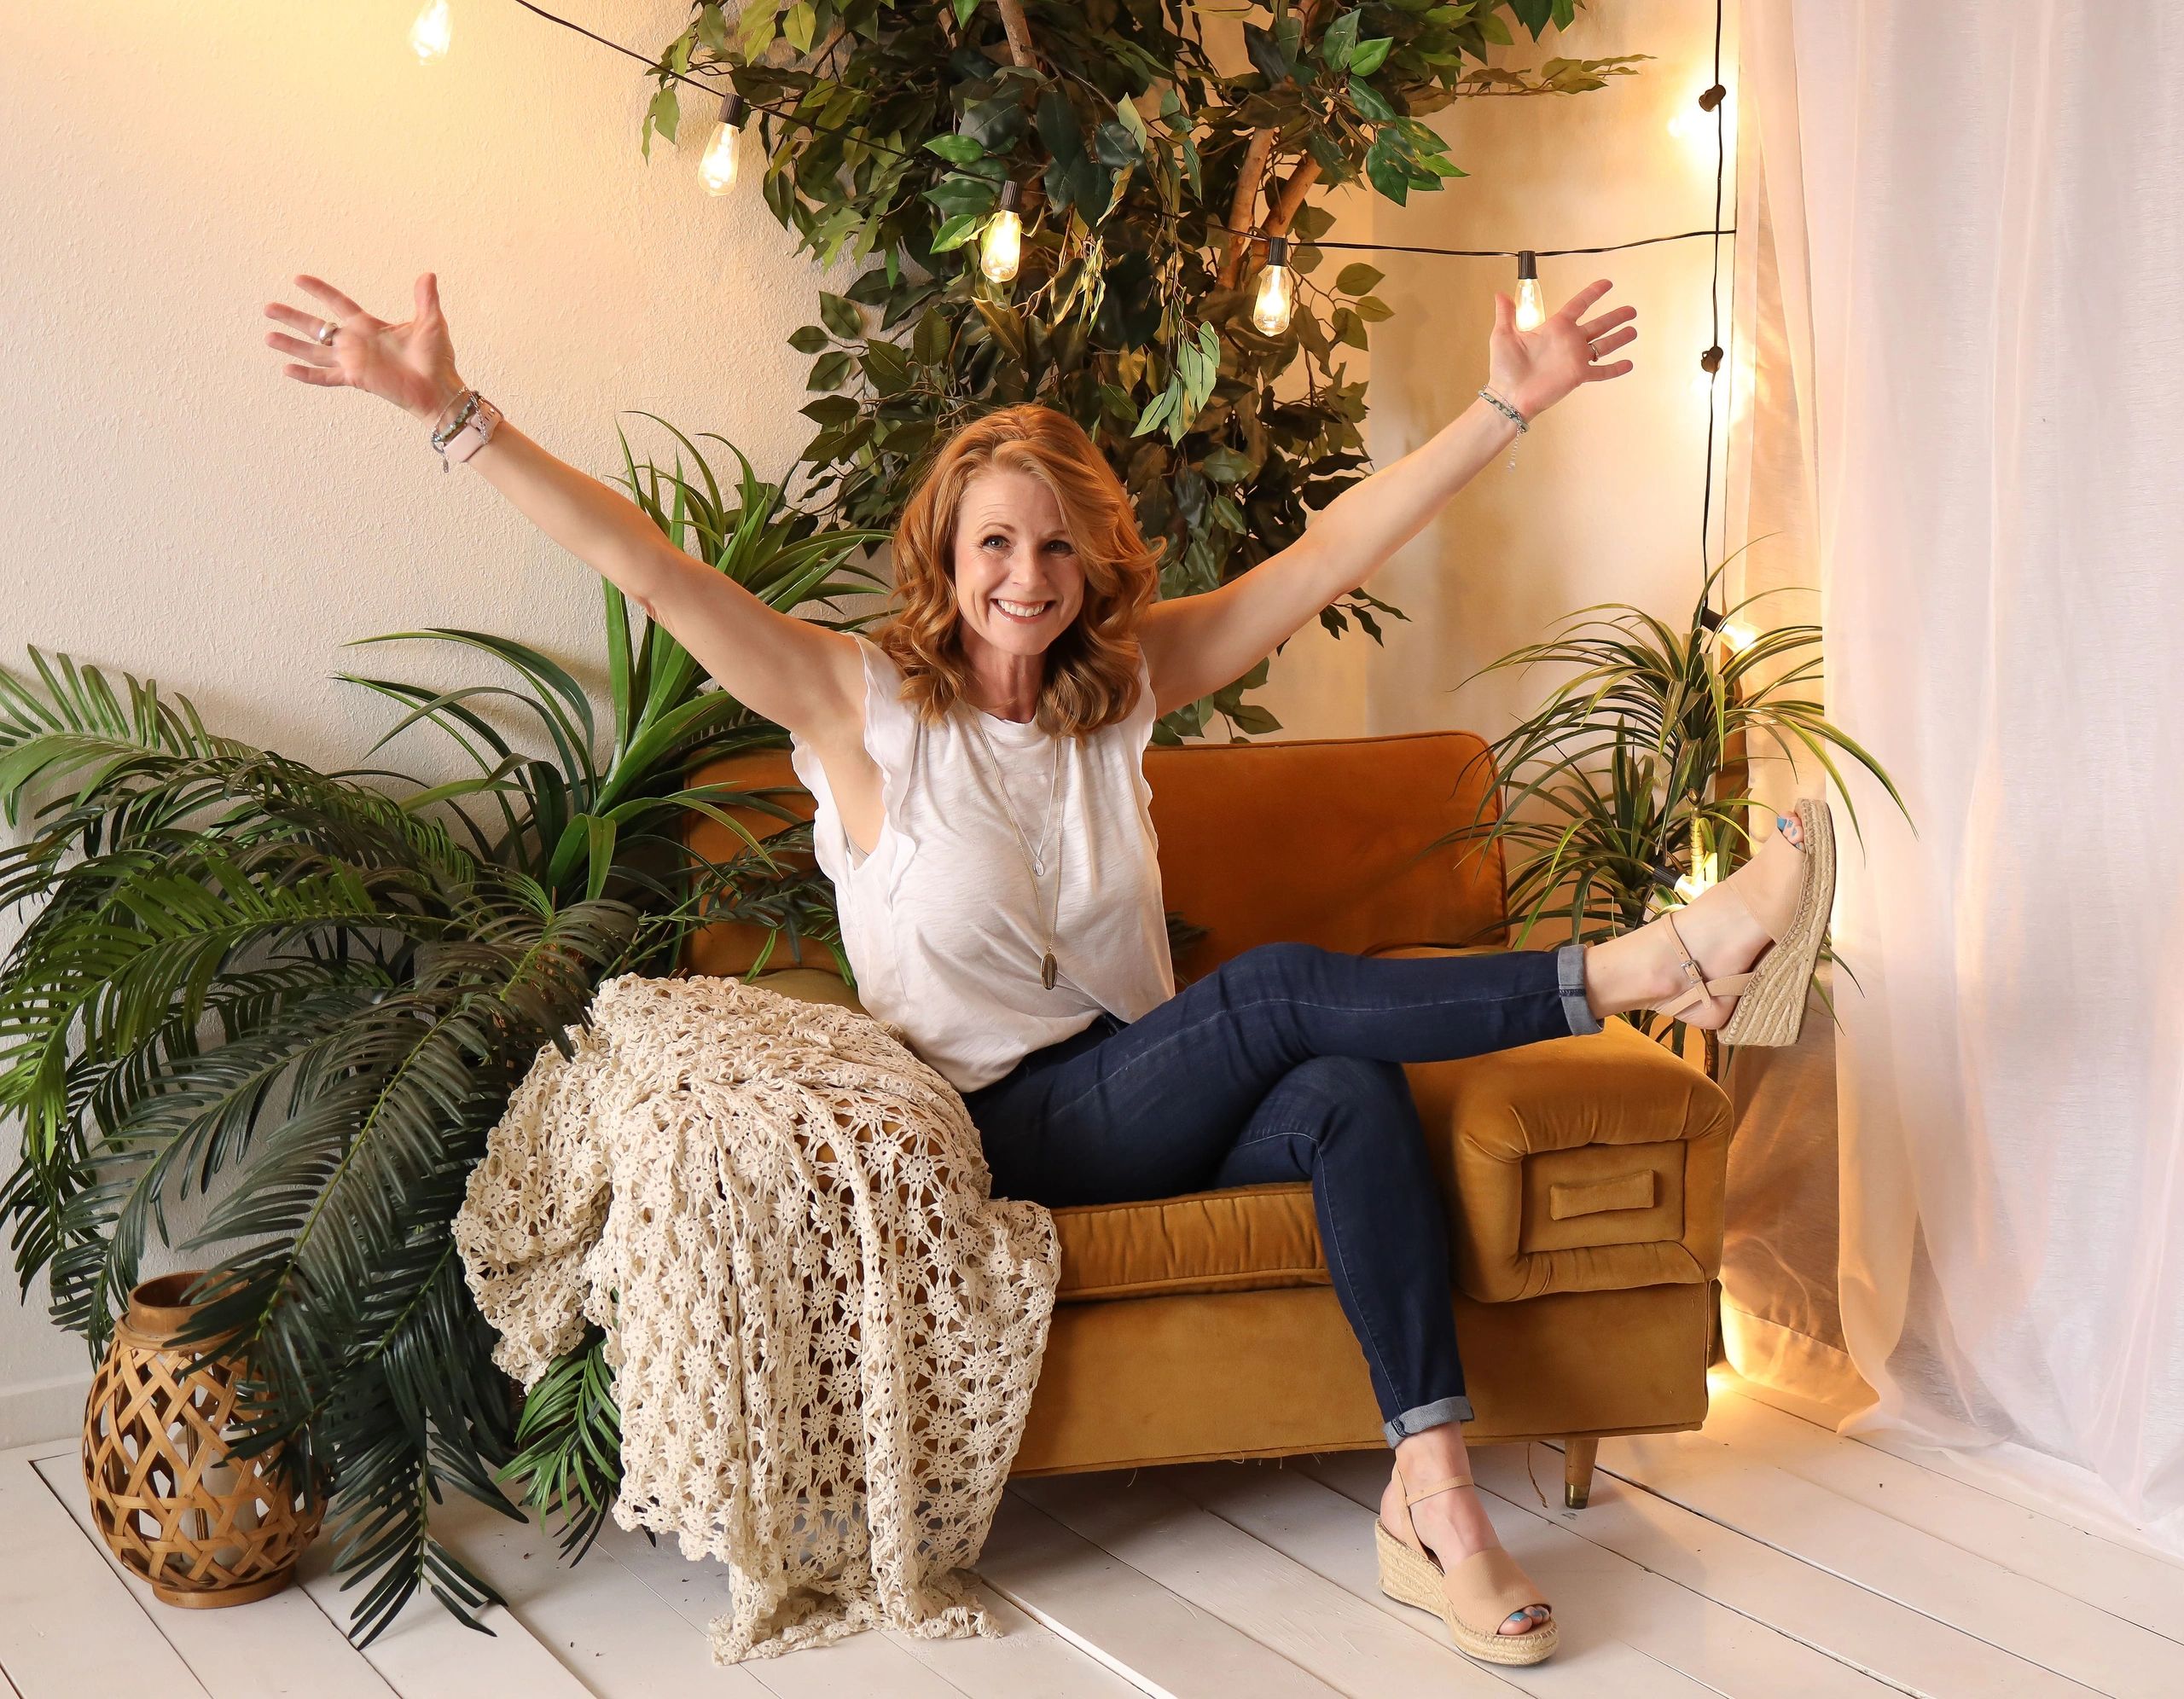 Siouxsie Przytulski the holistic health & life coach sitting on a couch with plants, lights and a bl